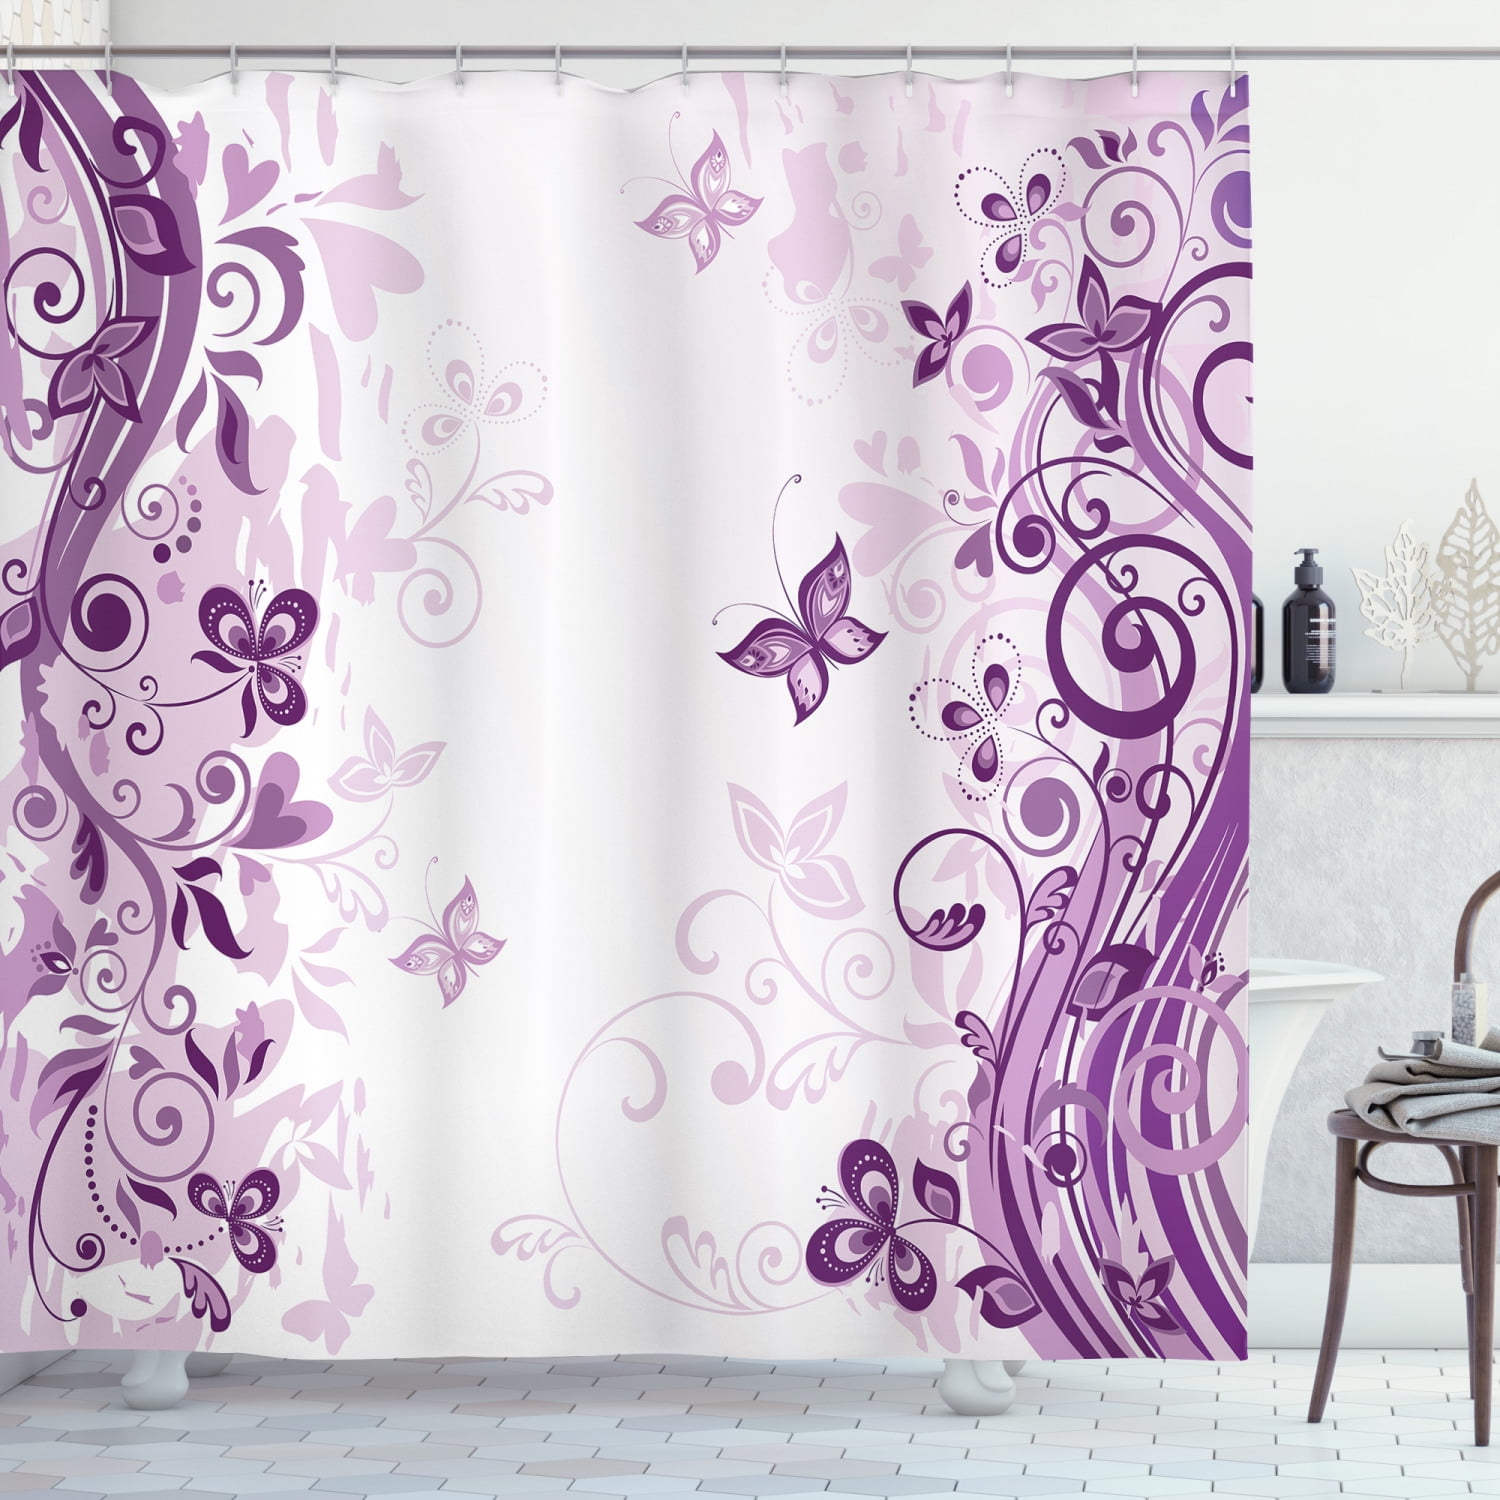 Details about   Shower Curtain Black White Stripes Butterfly Flower Floral Bathroom Decor New 